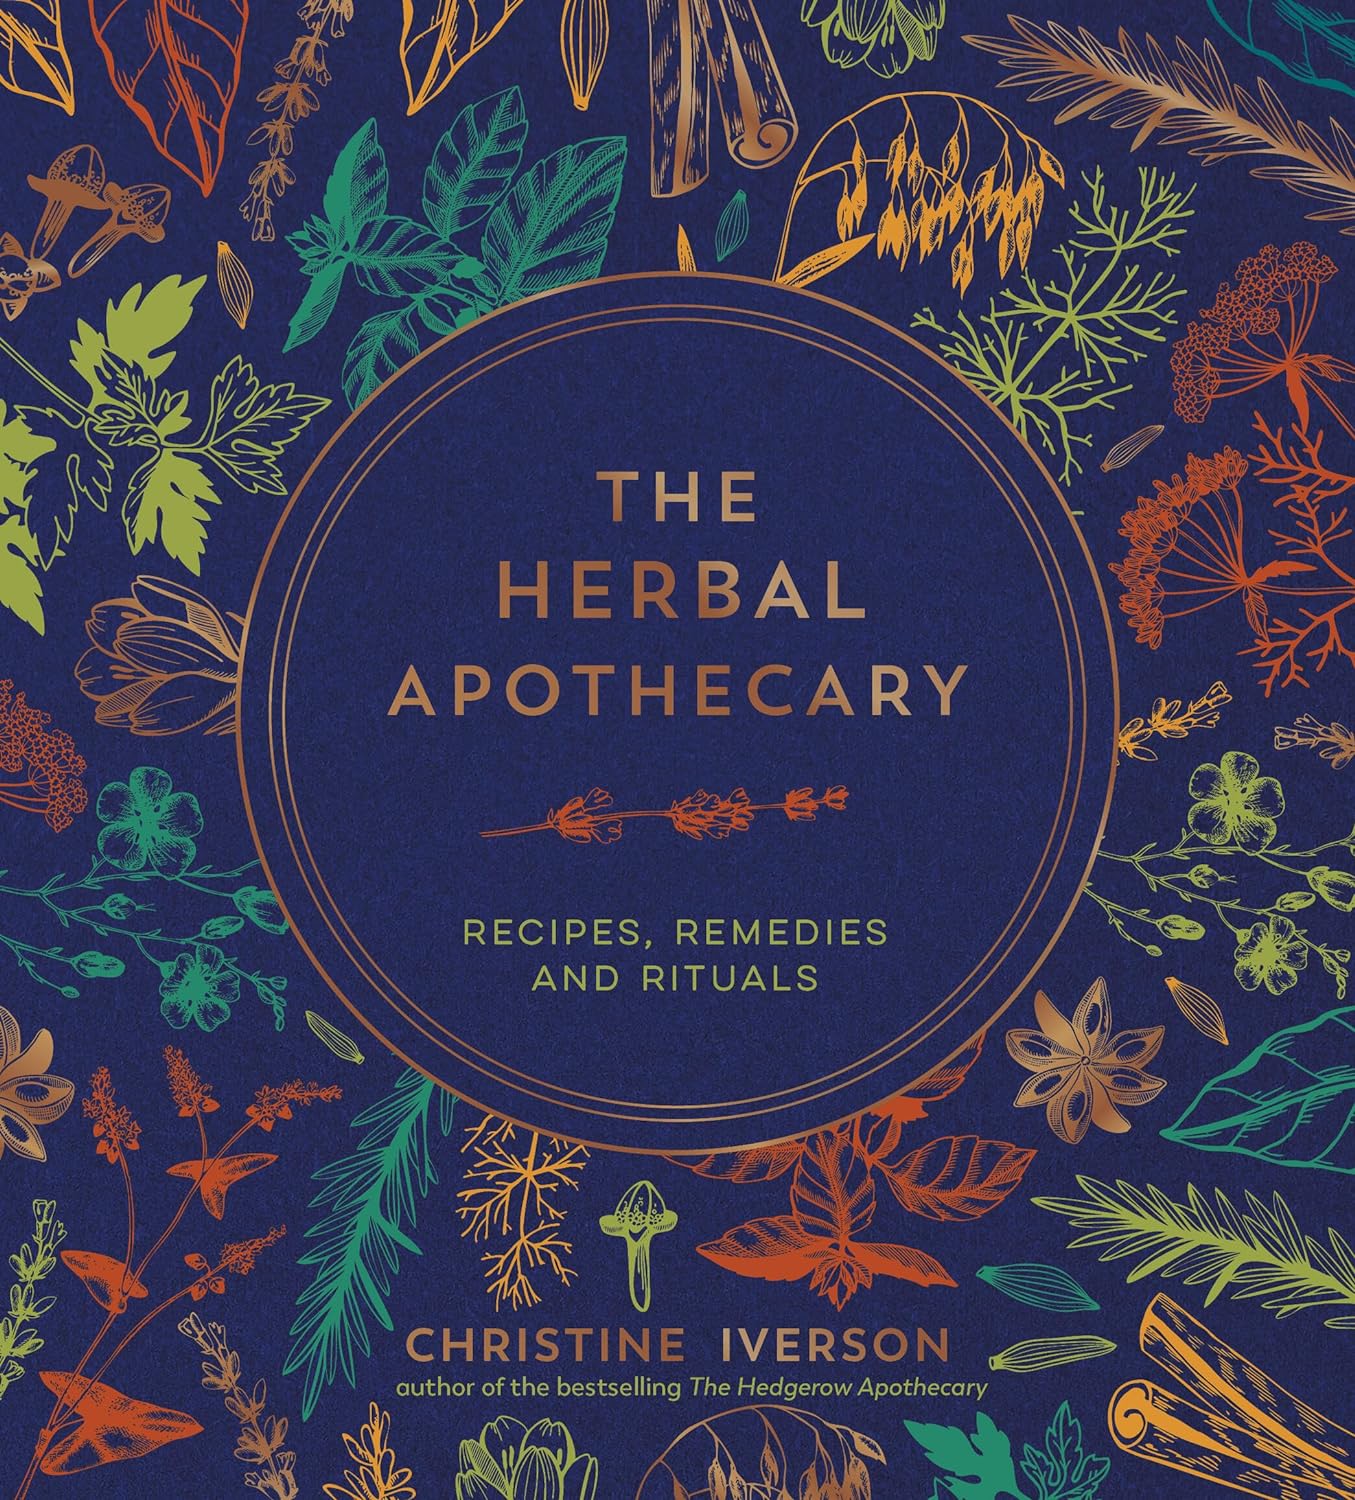 The Herbal Apothecary: Recipes, Remedies and Rituals (Christine Iverson)